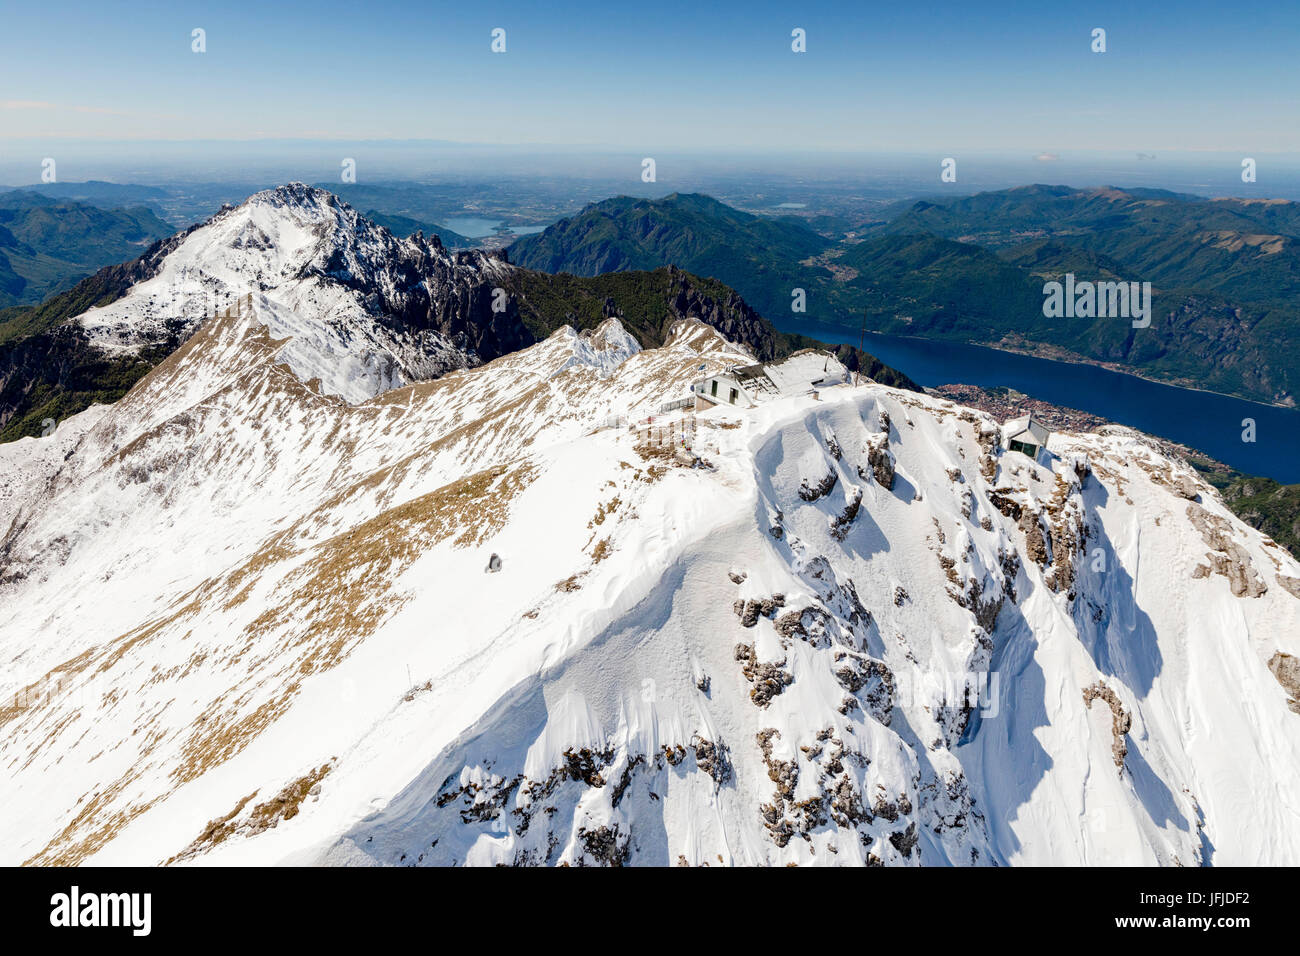 Aerial view of snowy peaks of Grignone with Brioschi Refuge on top and lake in background Lecco Province Lombardy Italy Europe Stock Photo